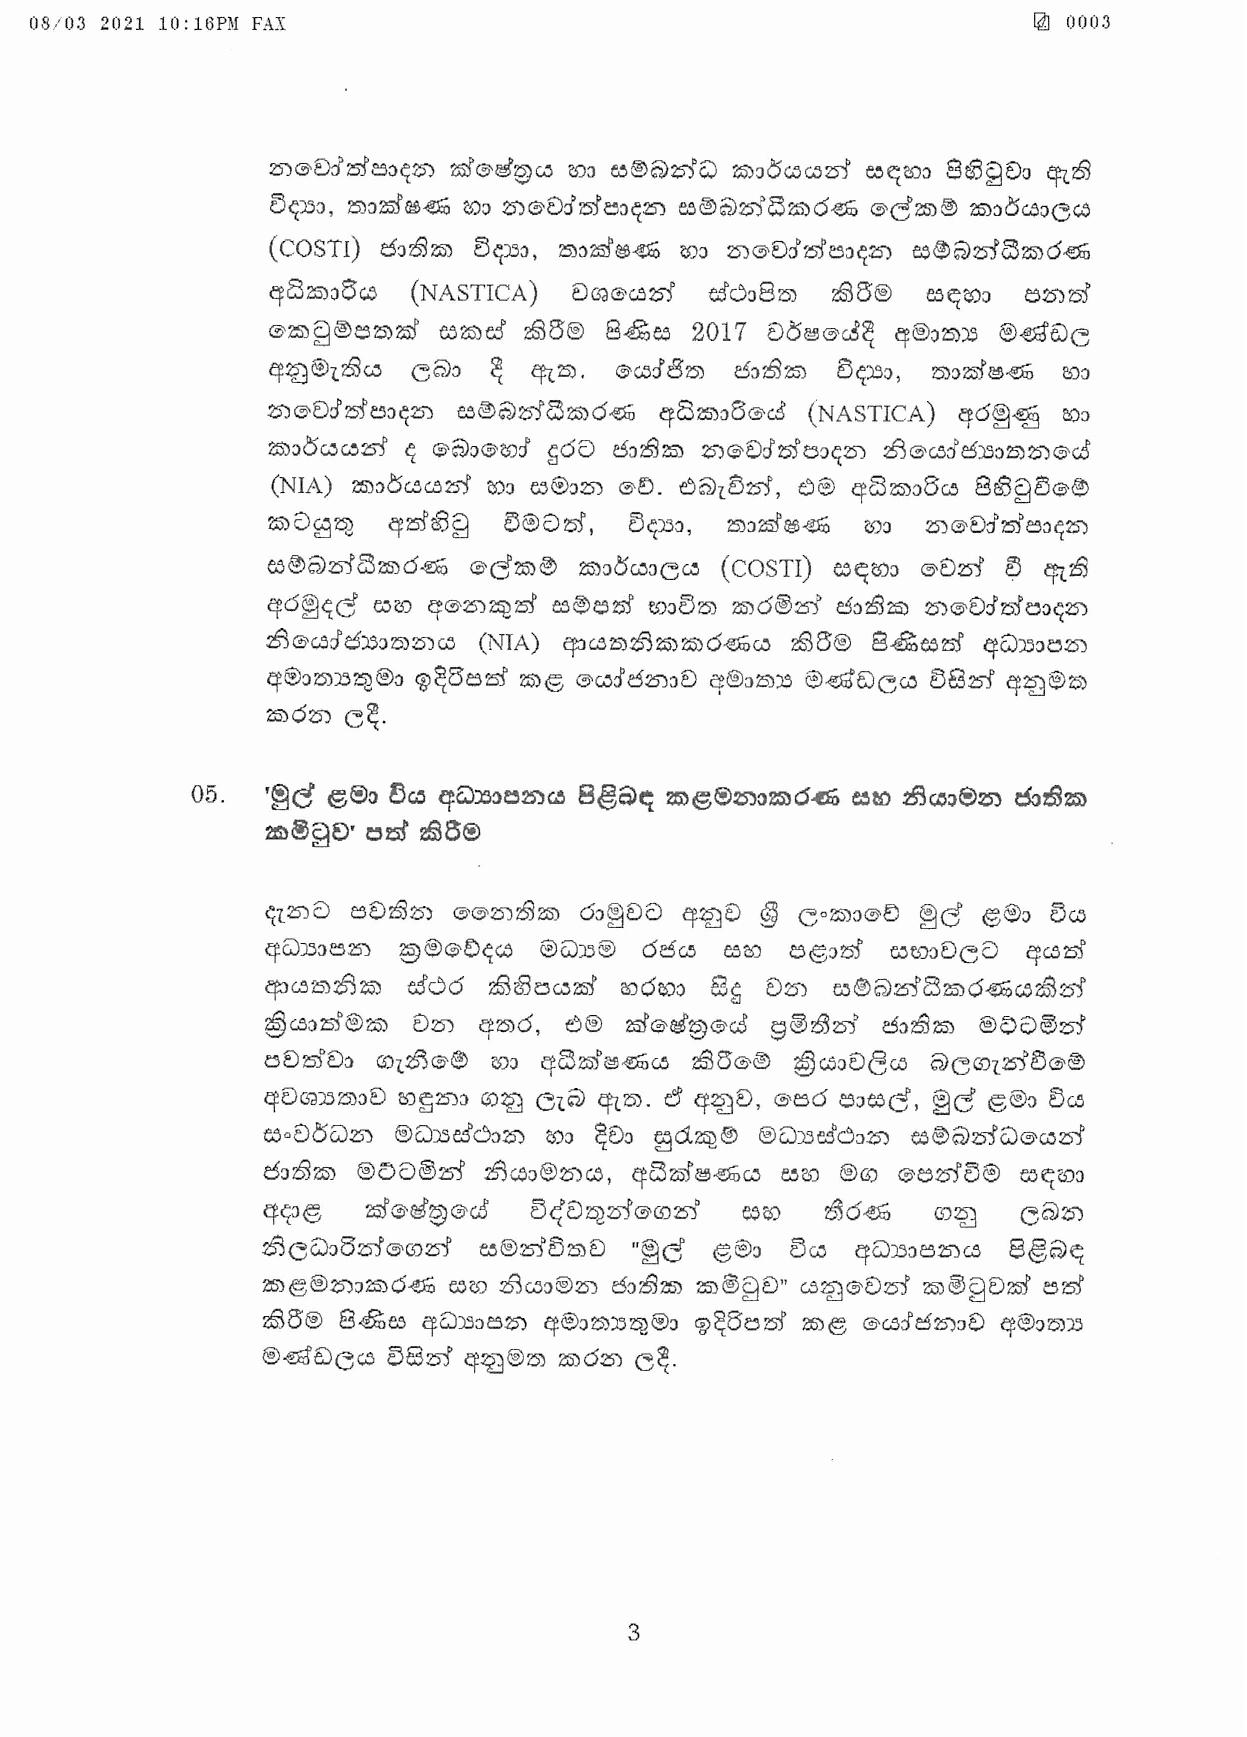 Cabinet Decision on 08.03.2021 page 003